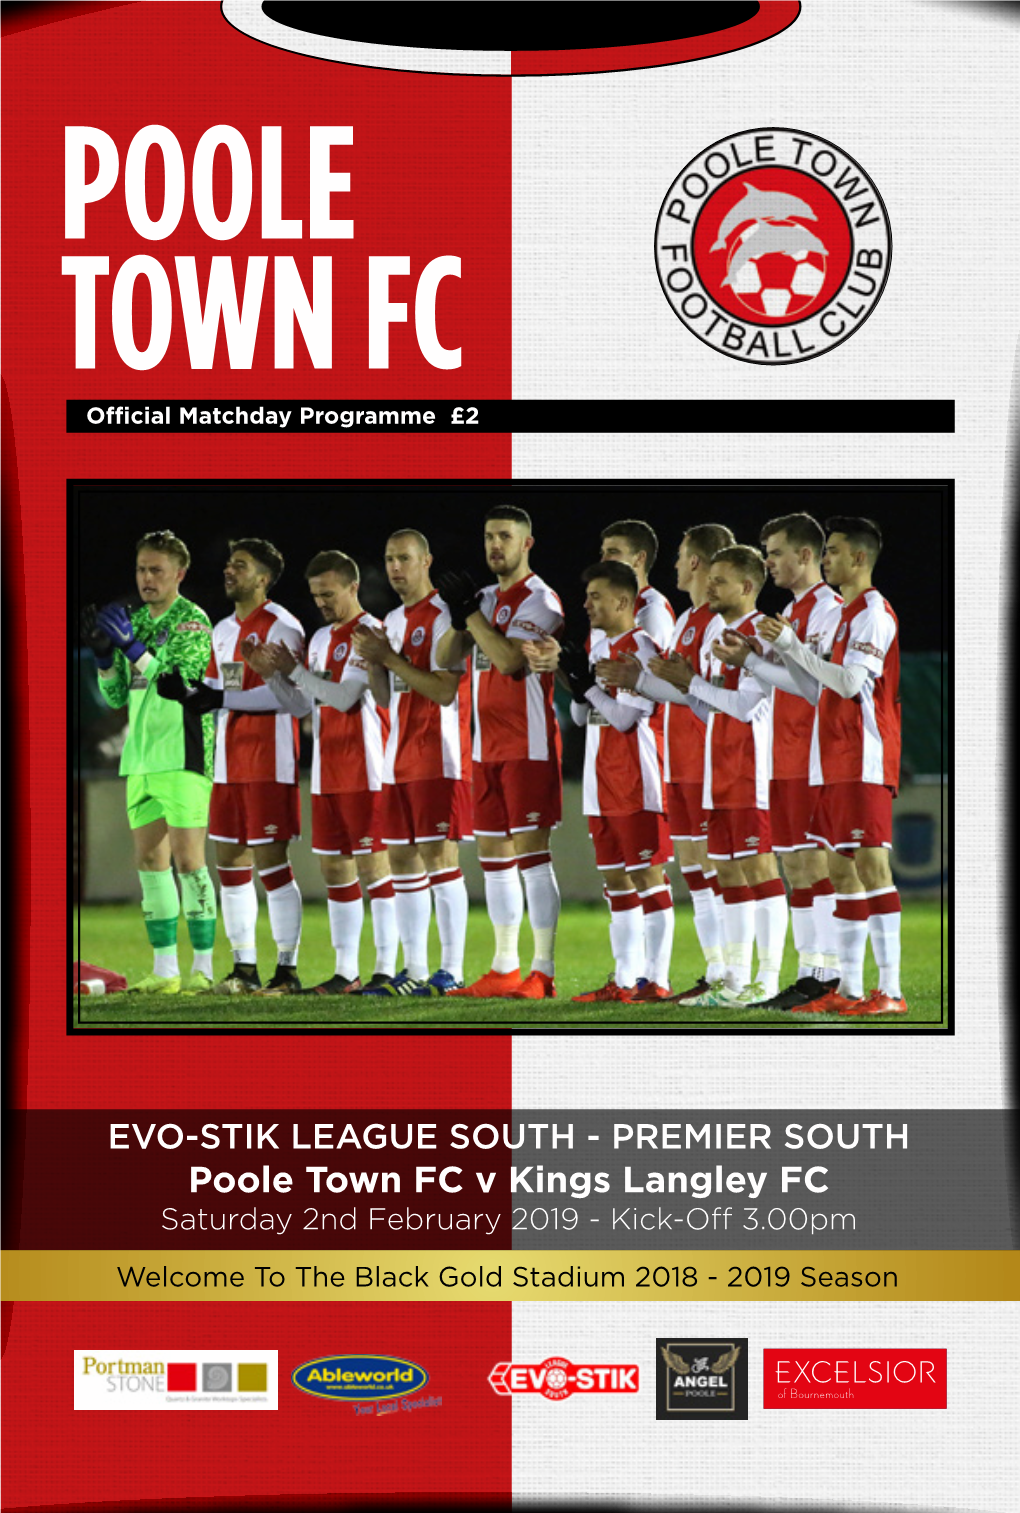 Poole Town FC V Kings Langley FC Saturday 2Nd February 2019 - Kick-Off 3.00Pm